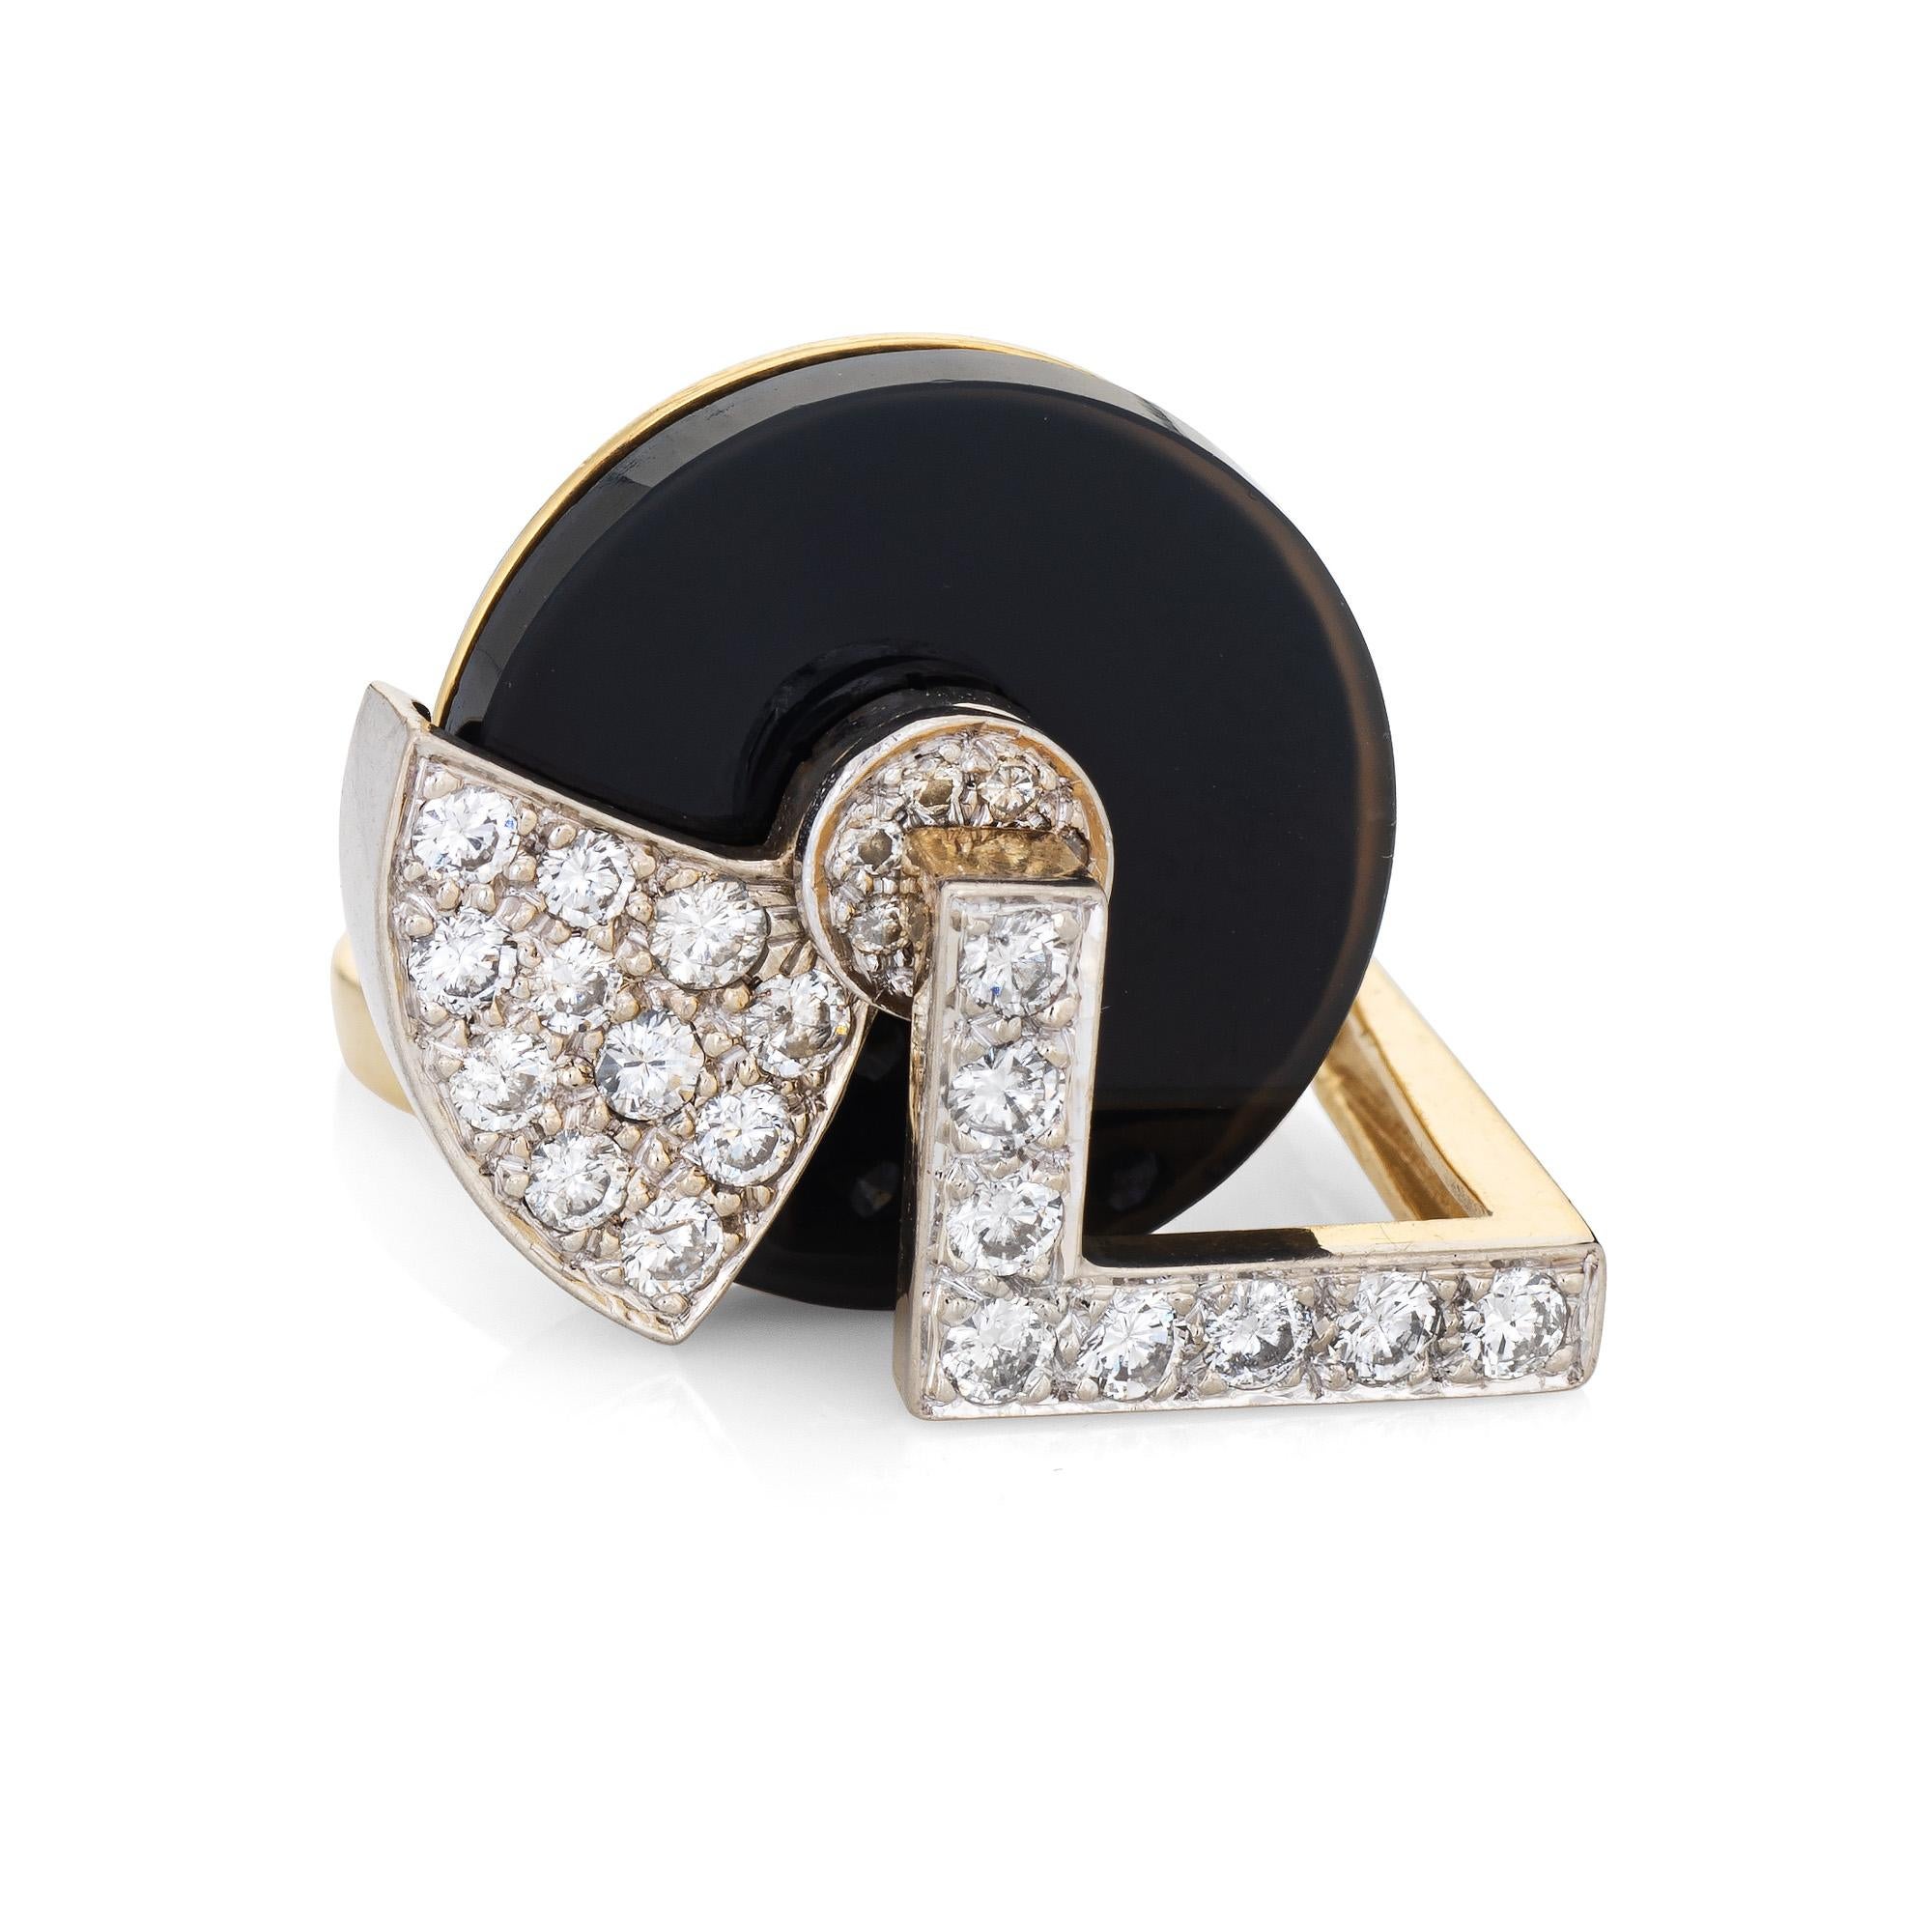 Distinct and unique onyx & diamond spinning ring (circa 1960s to 1970s), crafted in 18 karat yellow gold. 

Diamonds total an estimated 1 carat (estimated at H-I color and VS2-SI1 clarity). The onyx measures 19mm. The onyx is in very good condition